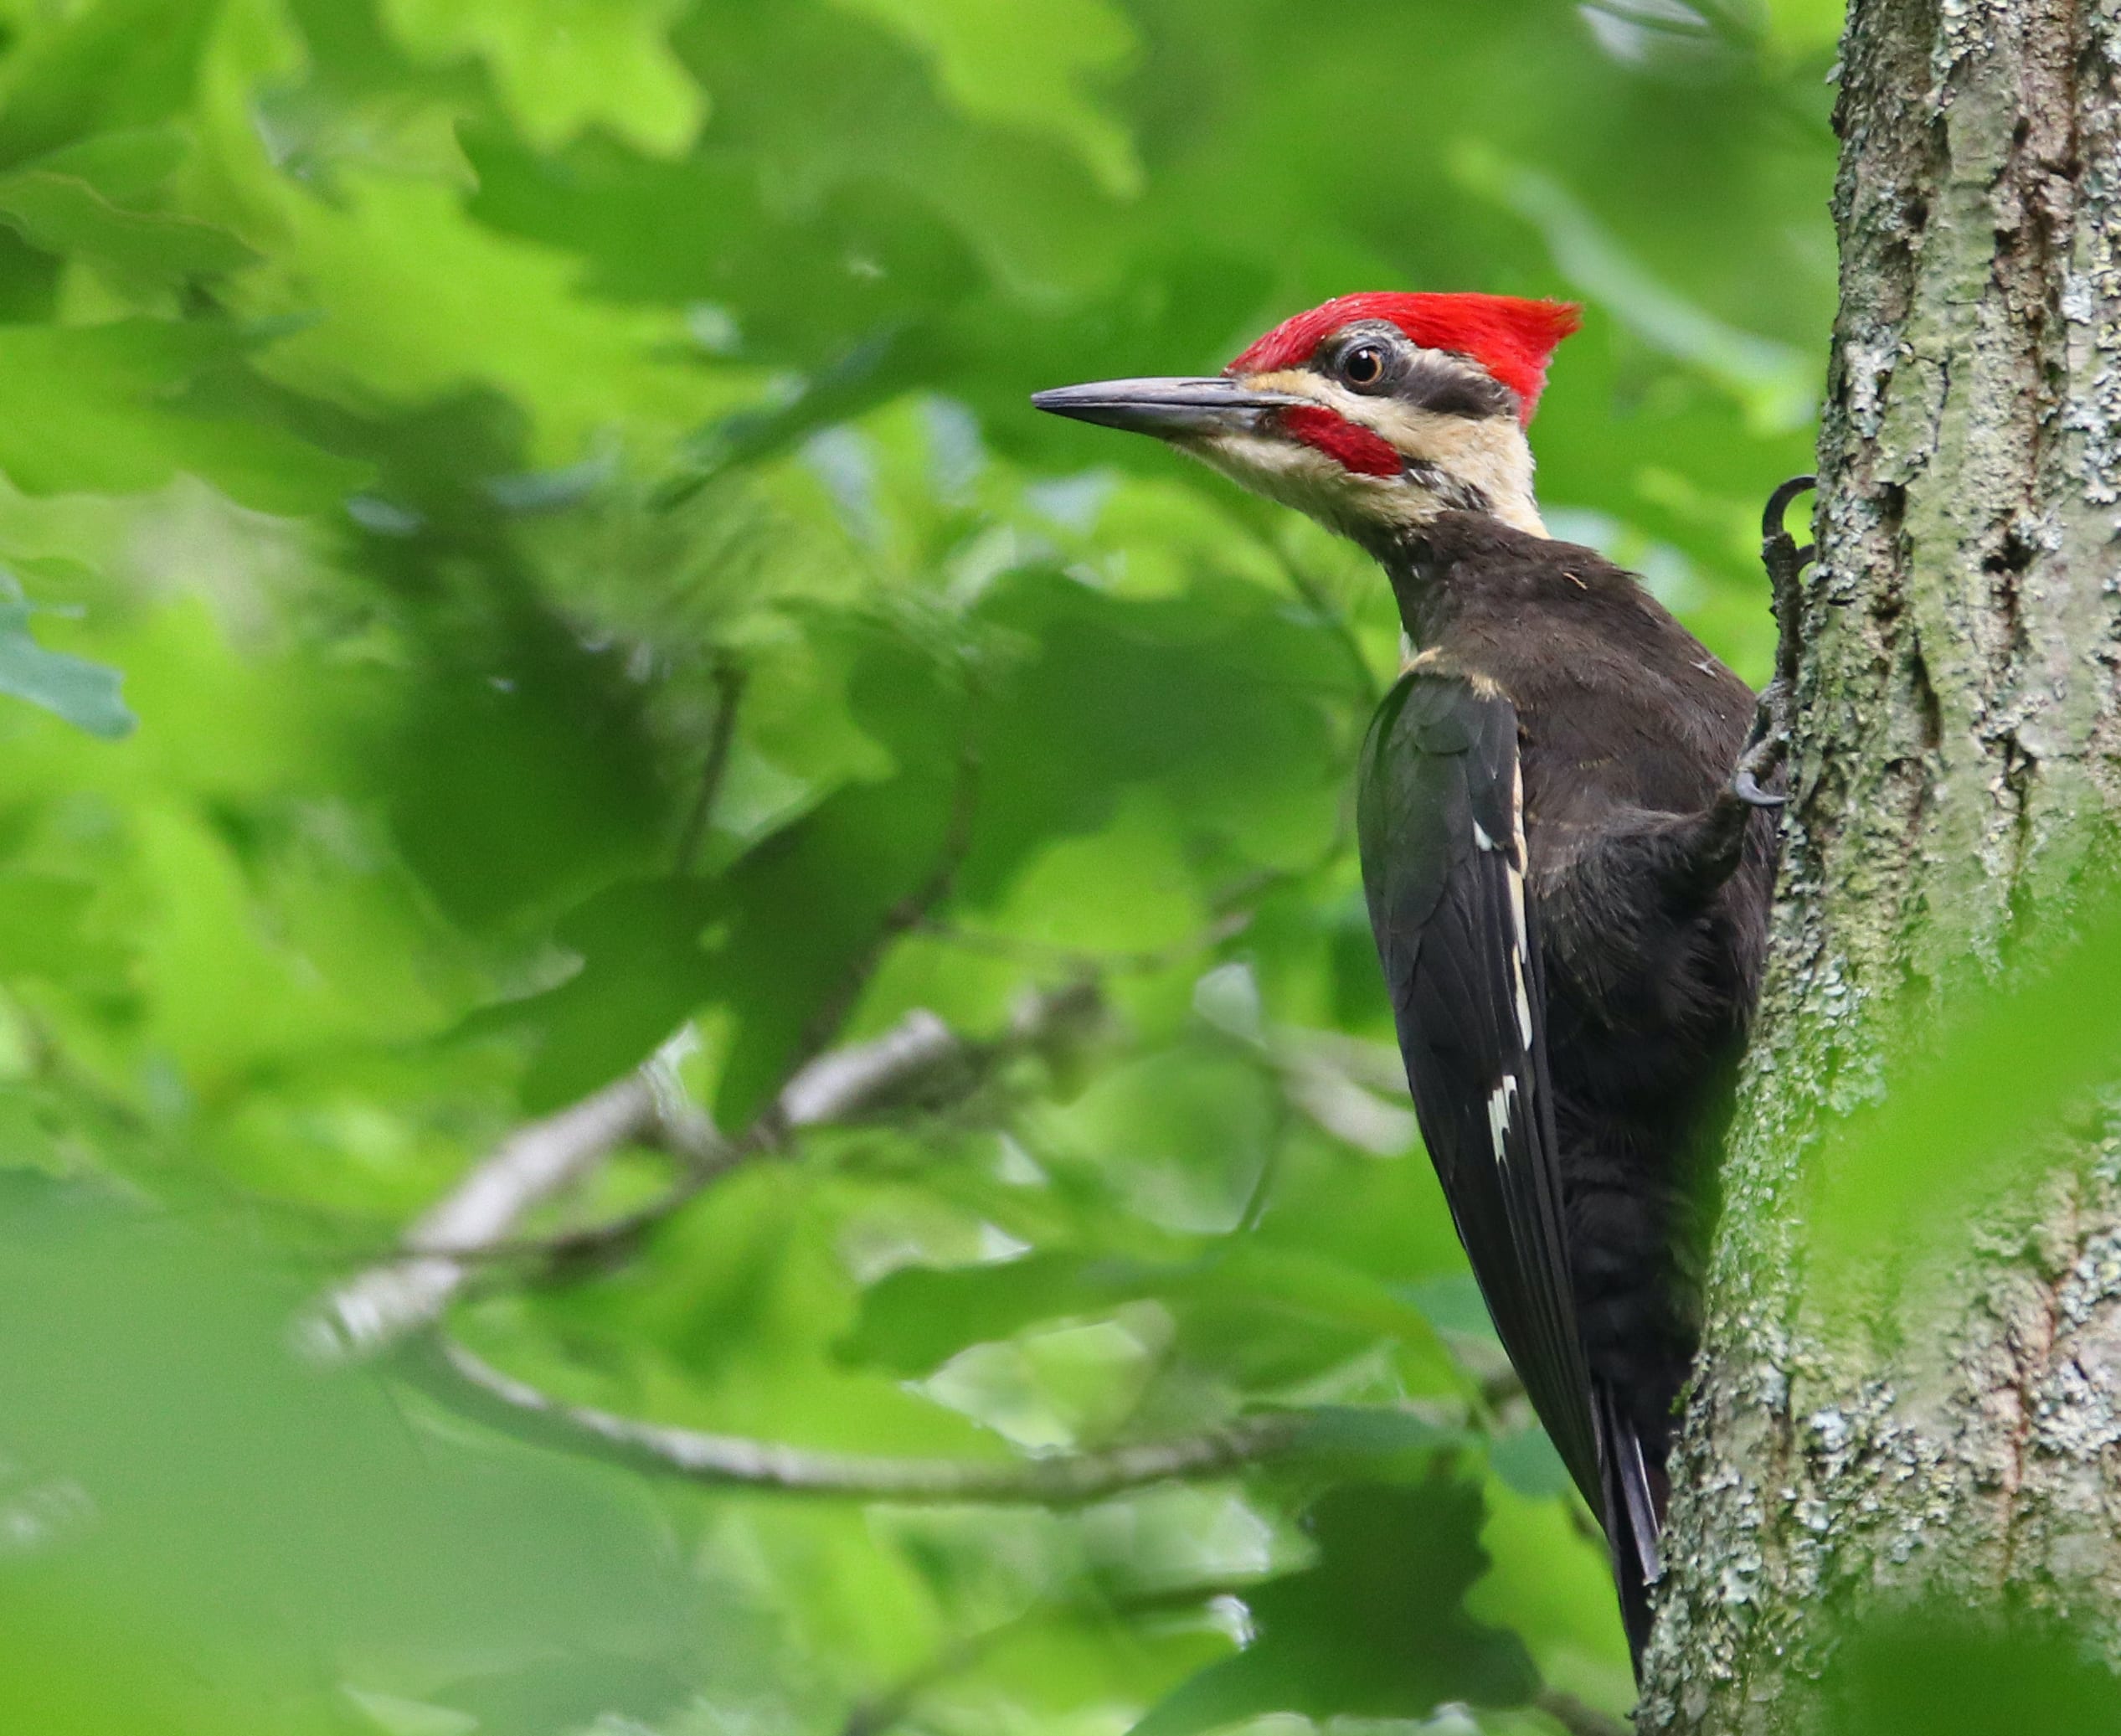 A pileated woodpecker with black body, white face and red top is perched on the side of a tree